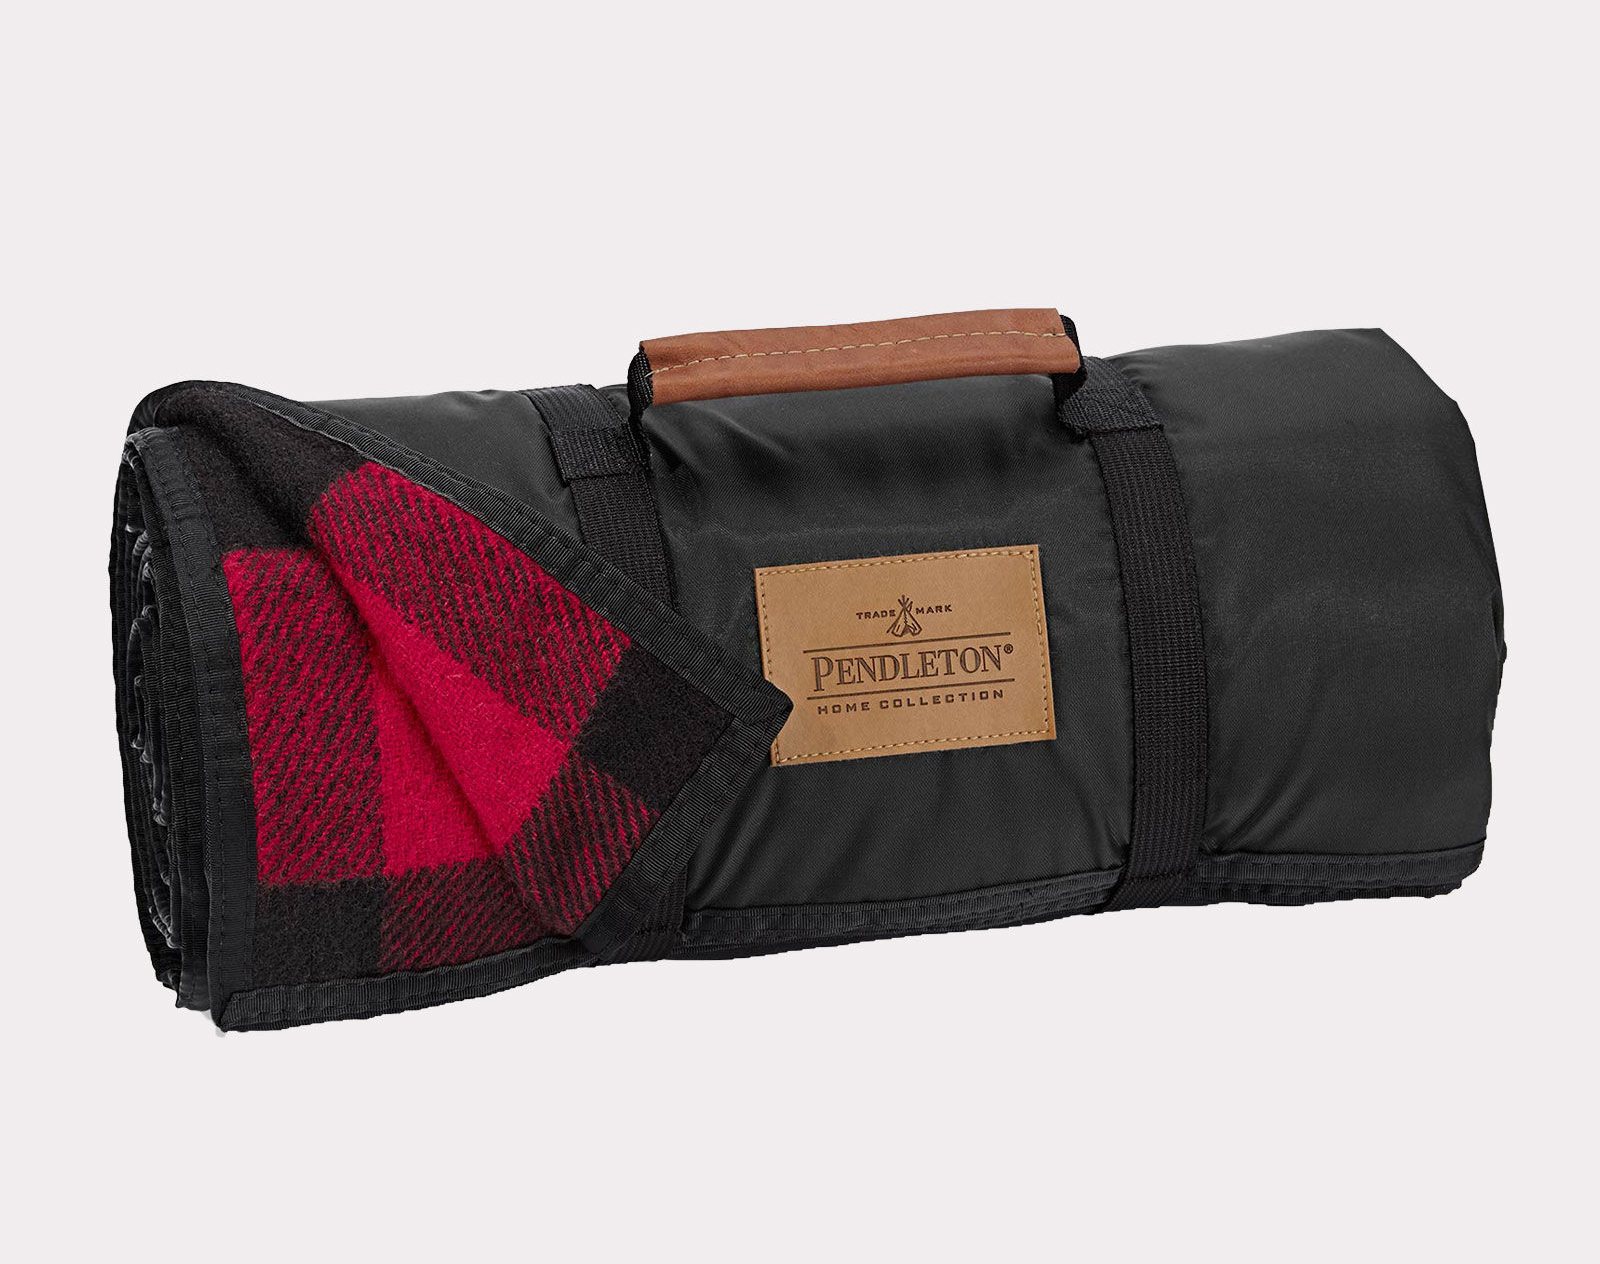 A Pendleton roll-up blanket in a black and red plaid with a black nylon backing and built-in handle with brown leather grip. 